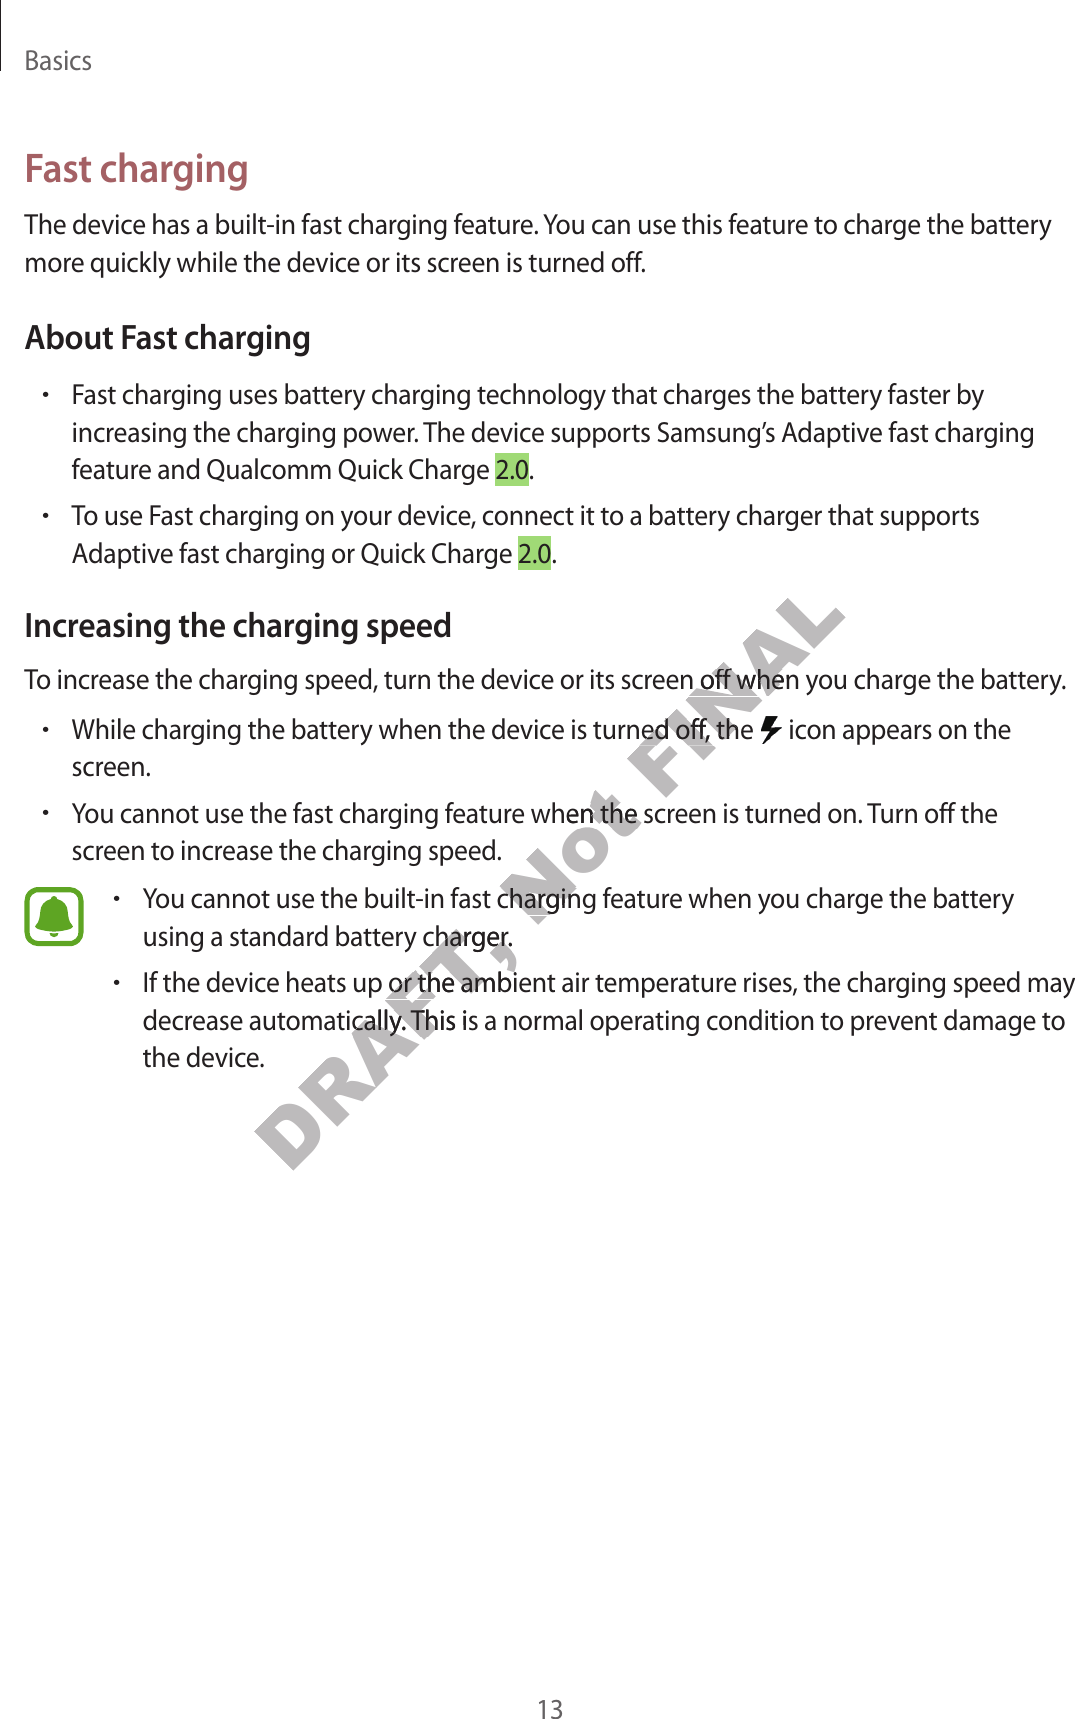 Basics13Fast chargingThe device has a built -in fast charg ing f ea tur e . You can use this featur e to char ge the batt ery more quickly while the device or its screen is turned off.About Fast charging•Fast charg ing uses batt ery charging technology that charges the ba ttery faster by increasing the char ging po w er. The device supports Samsung ’s Adaptiv e fast char ging featur e and Qualc omm Quick Charge 2.0.•To use Fast charg ing on y our device, connect it to a batt ery charger that supports Adaptiv e fast char ging or Quick Char ge 2.0.Increasing the charg ing speedTo increase the char ging speed , turn the device or its scr een off when y ou char ge the ba ttery.•While charg ing the batt ery when the device is turned off , the   icon appears on the screen.•You cannot use the fast charging featur e when the screen is turned on.  Turn off the screen to incr ease the char g ing speed .•You cannot use the built-in fast charging f eatur e when y ou char ge the batt ery using a standard batt ery charger.•If the device heats up or the ambient air tempera tur e rises, the char g ing speed ma y decrease automa tically. T his is a normal operating c ondition to pr ev en t damage to the device .DRAFT, You cannot use the built-in fast charging f eatur e when y ou char ge the batt ery DRAFT, You cannot use the built-in fast charging f eatur e when y ou char ge the batt ery DRAFT, using a standard batt ery charger.DRAFT, using a standard batt ery charger.If the device heats up or the ambient air tempera tur e rises, the char g ing speed ma y DRAFT, If the device heats up or the ambient air tempera tur e rises, the char g ing speed ma y DRAFT, decrease automa tically. T his is a normal operating c ondition to pr ev en t damage to DRAFT, decrease automa tically. T his is a normal operating c ondition to pr ev en t damage to Not You cannot use the fast charging featur e when the screen is turned on.  Turn off the Not You cannot use the fast charging featur e when the screen is turned on.  Turn off the You cannot use the built-in fast charging f eatur e when y ou char ge the batt ery Not You cannot use the built-in fast charging f eatur e when y ou char ge the batt ery FINALTo increase the char ging speed , turn the device or its scr een off when y ou char ge the ba ttery.FINALTo increase the char ging speed , turn the device or its scr een off when y ou char ge the ba ttery.While charg ing the batt ery when the device is turned off , the FINALWhile charg ing the batt ery when the device is turned off , the 